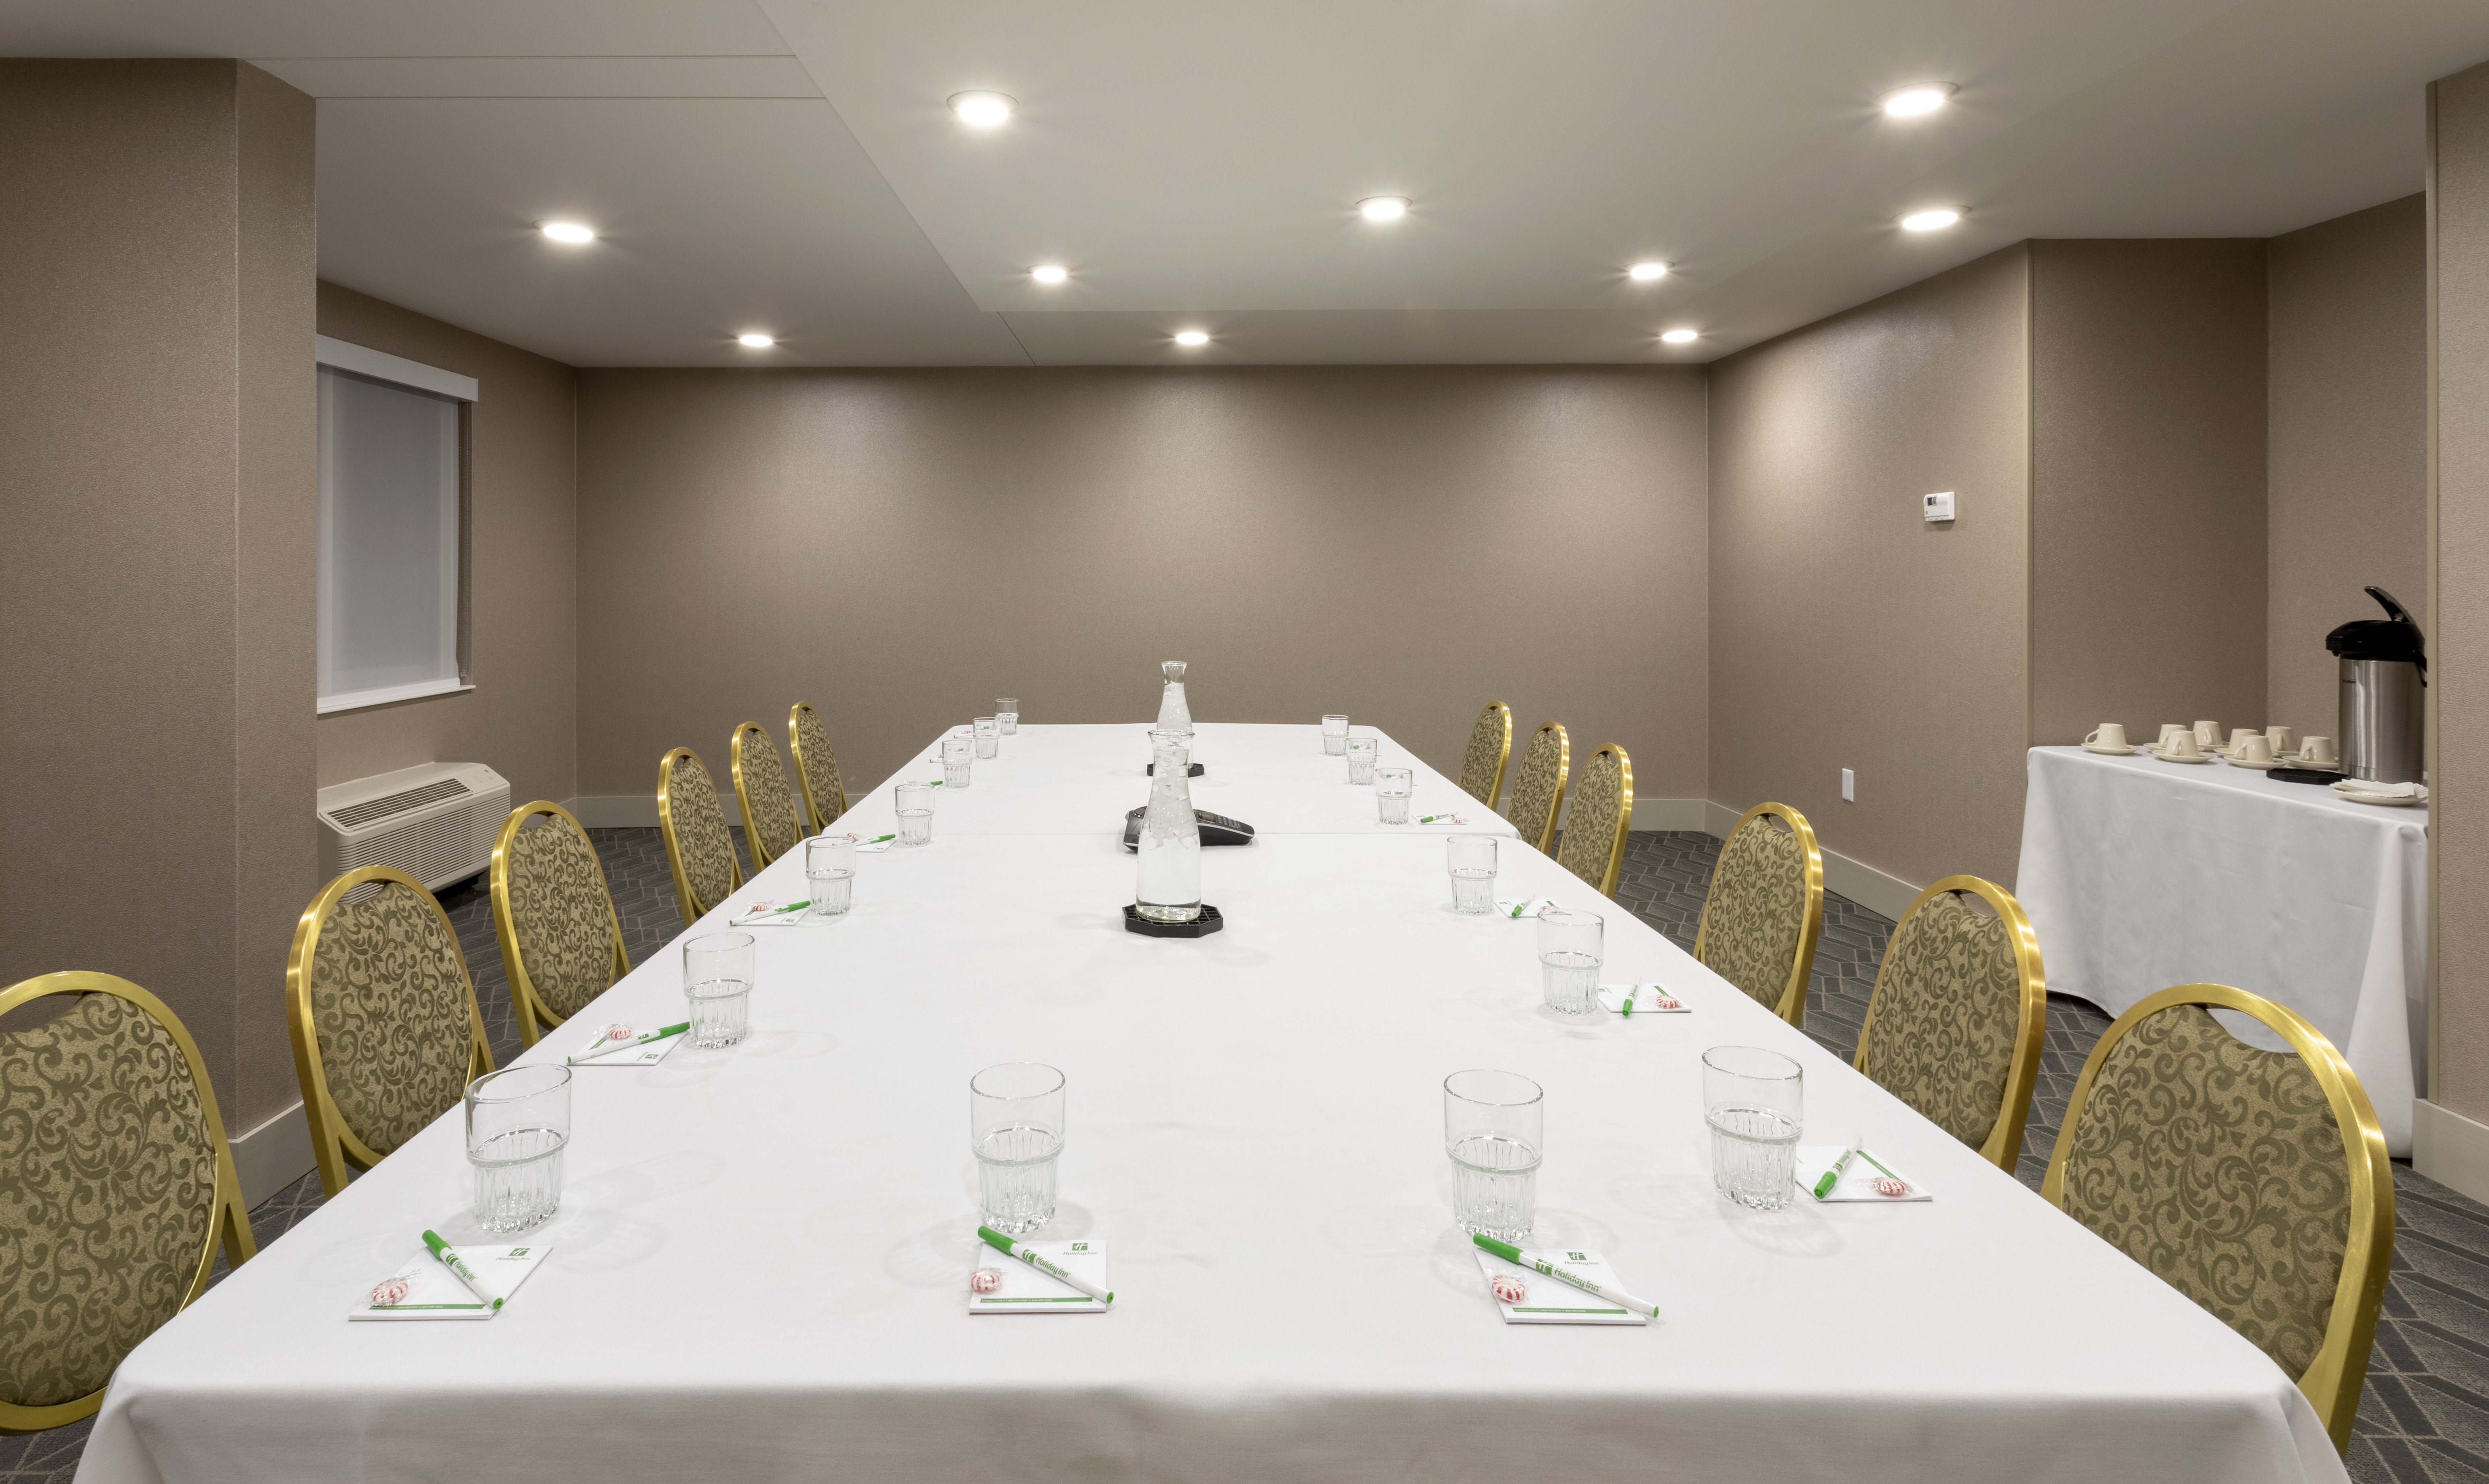 Call our Sales Office at 906-315-4211 to reserve your meeting room